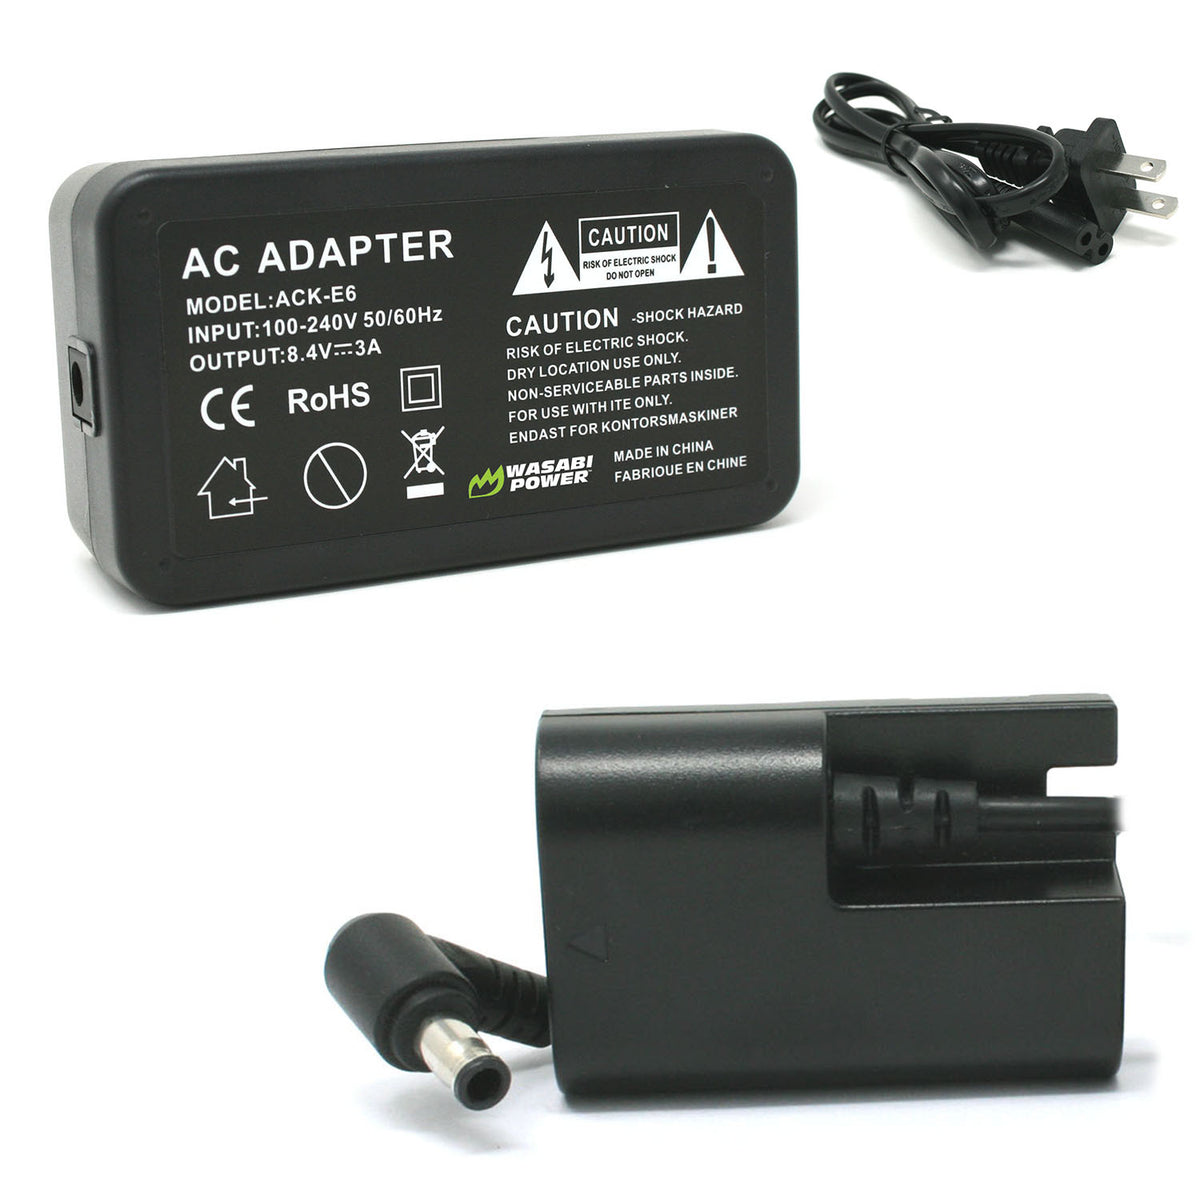 Canon LP-E6 AC Power Adapter Kit (Fully Decoded) with DC Coupler for C –  Wasabi Power